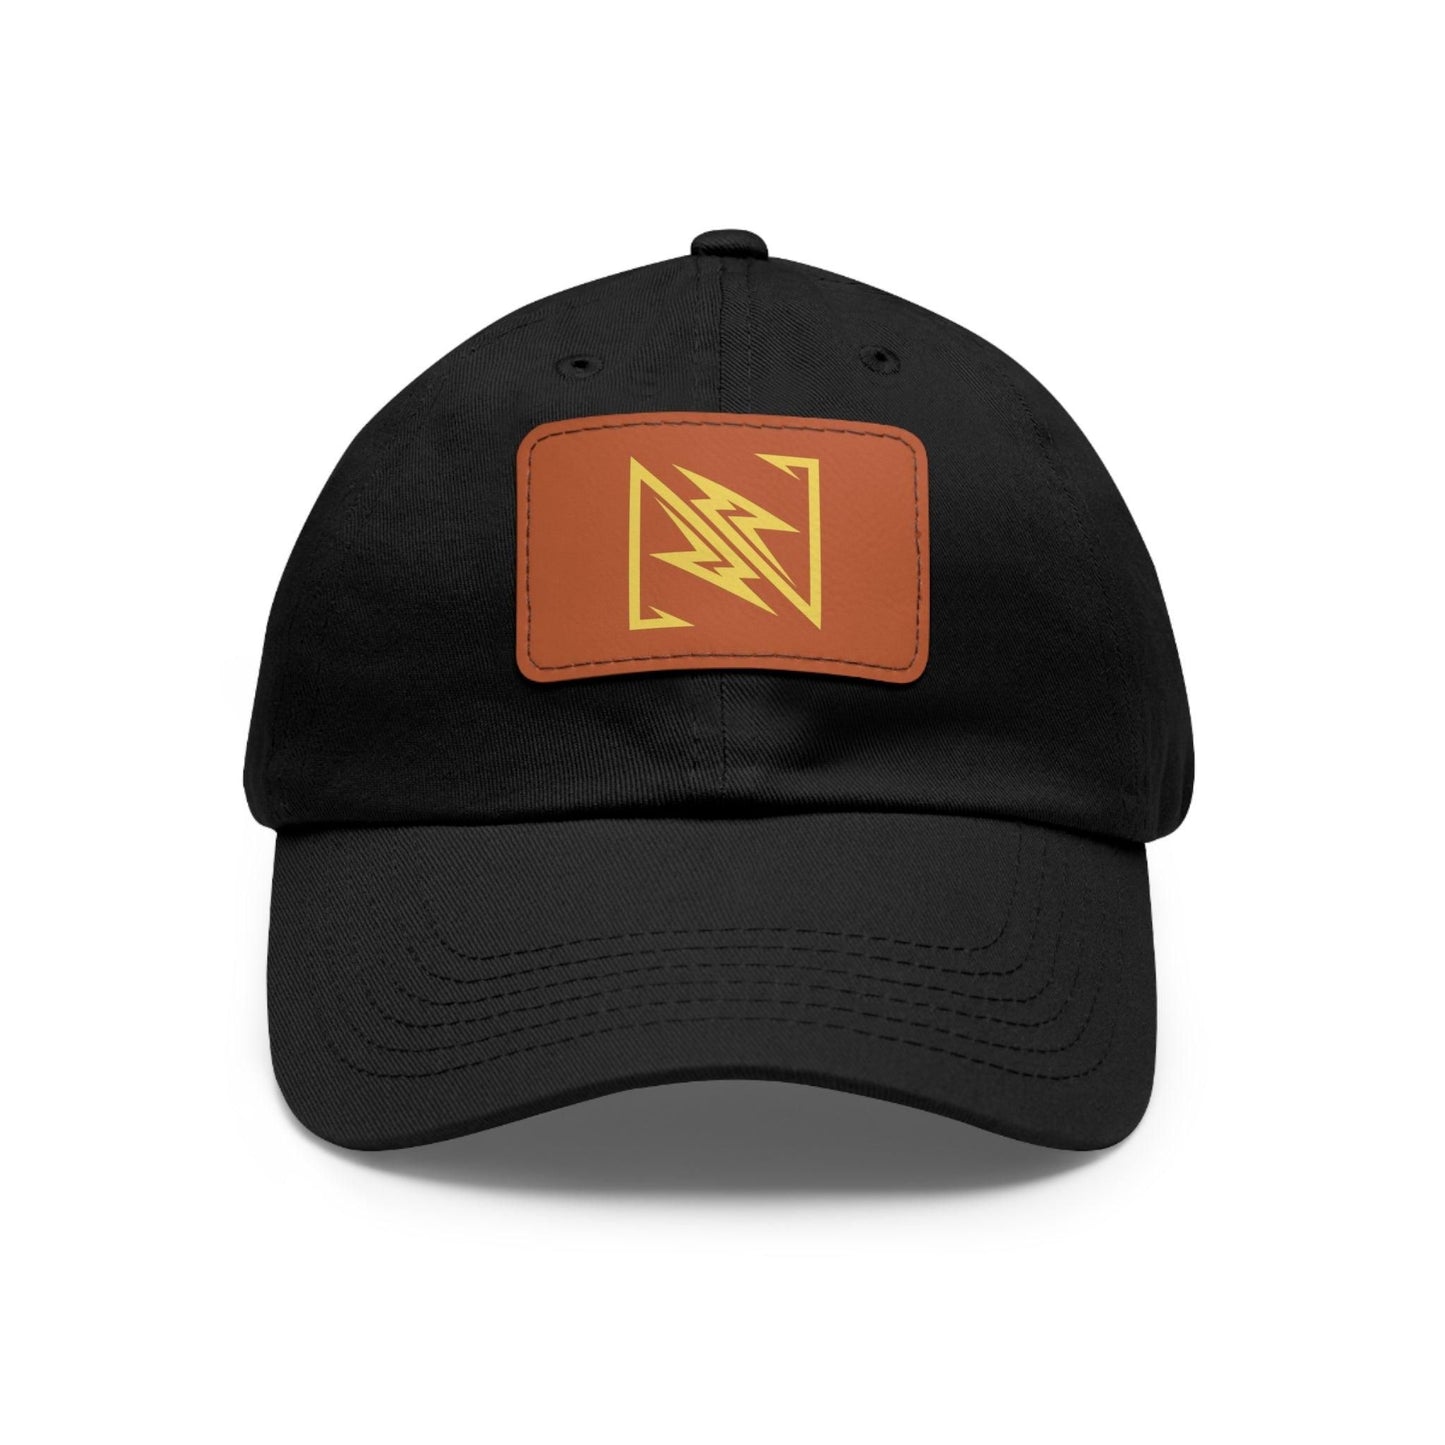 NX Vogue Premium Baseball Hat with Leather Patch Cap Black / Light Brown Rectangle One size